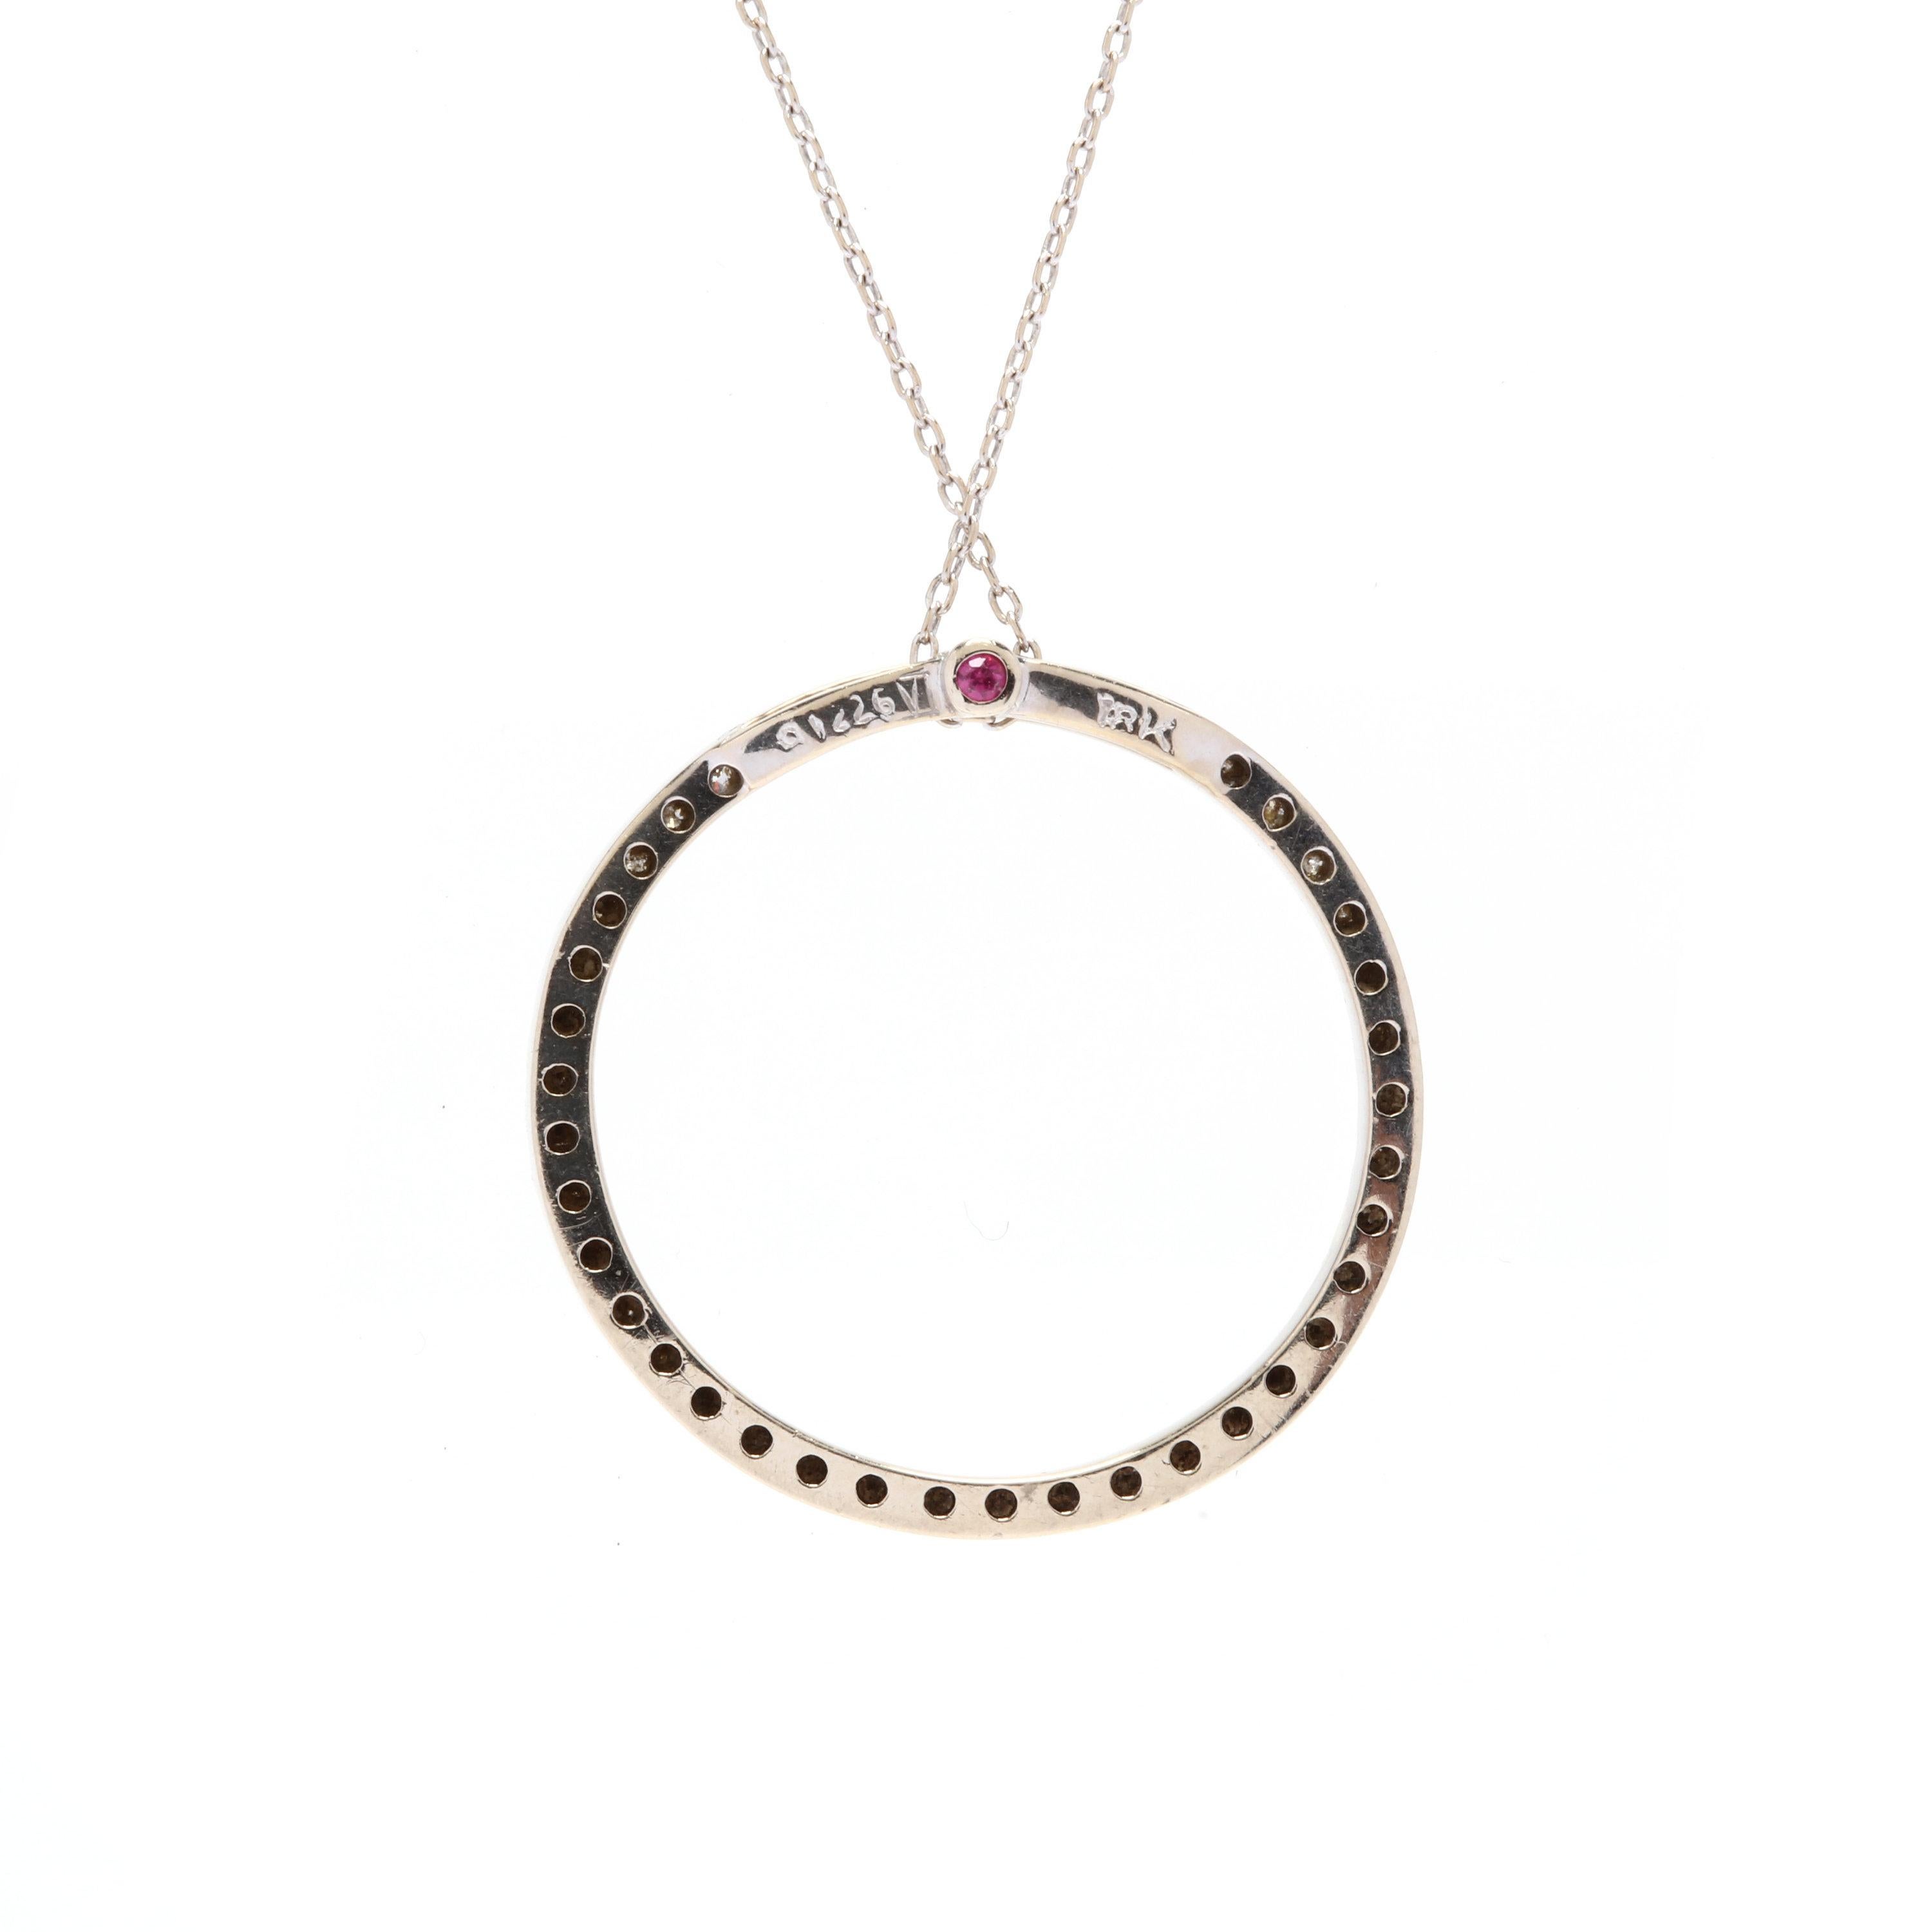 Roberto Coin 18k white gold, diamond & ruby circle pendant necklace. A timeless look by well-known designer Roberto Coin, you can't go wrong with a diamond eternity pendant. A dainty ring of diamonds with his trademark ruby set on the back of the